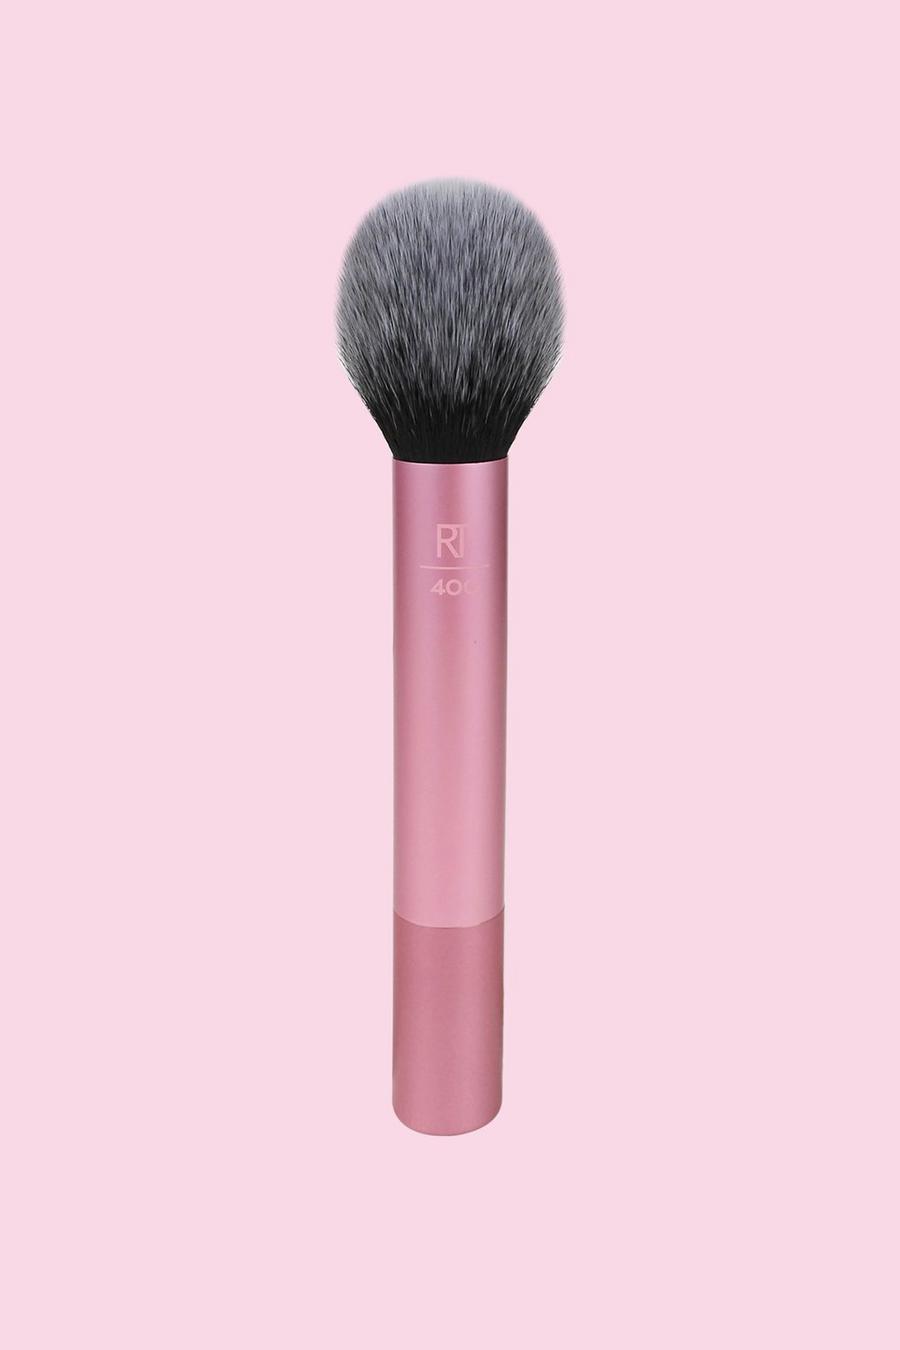 Pink Real Techniques Blush Brush